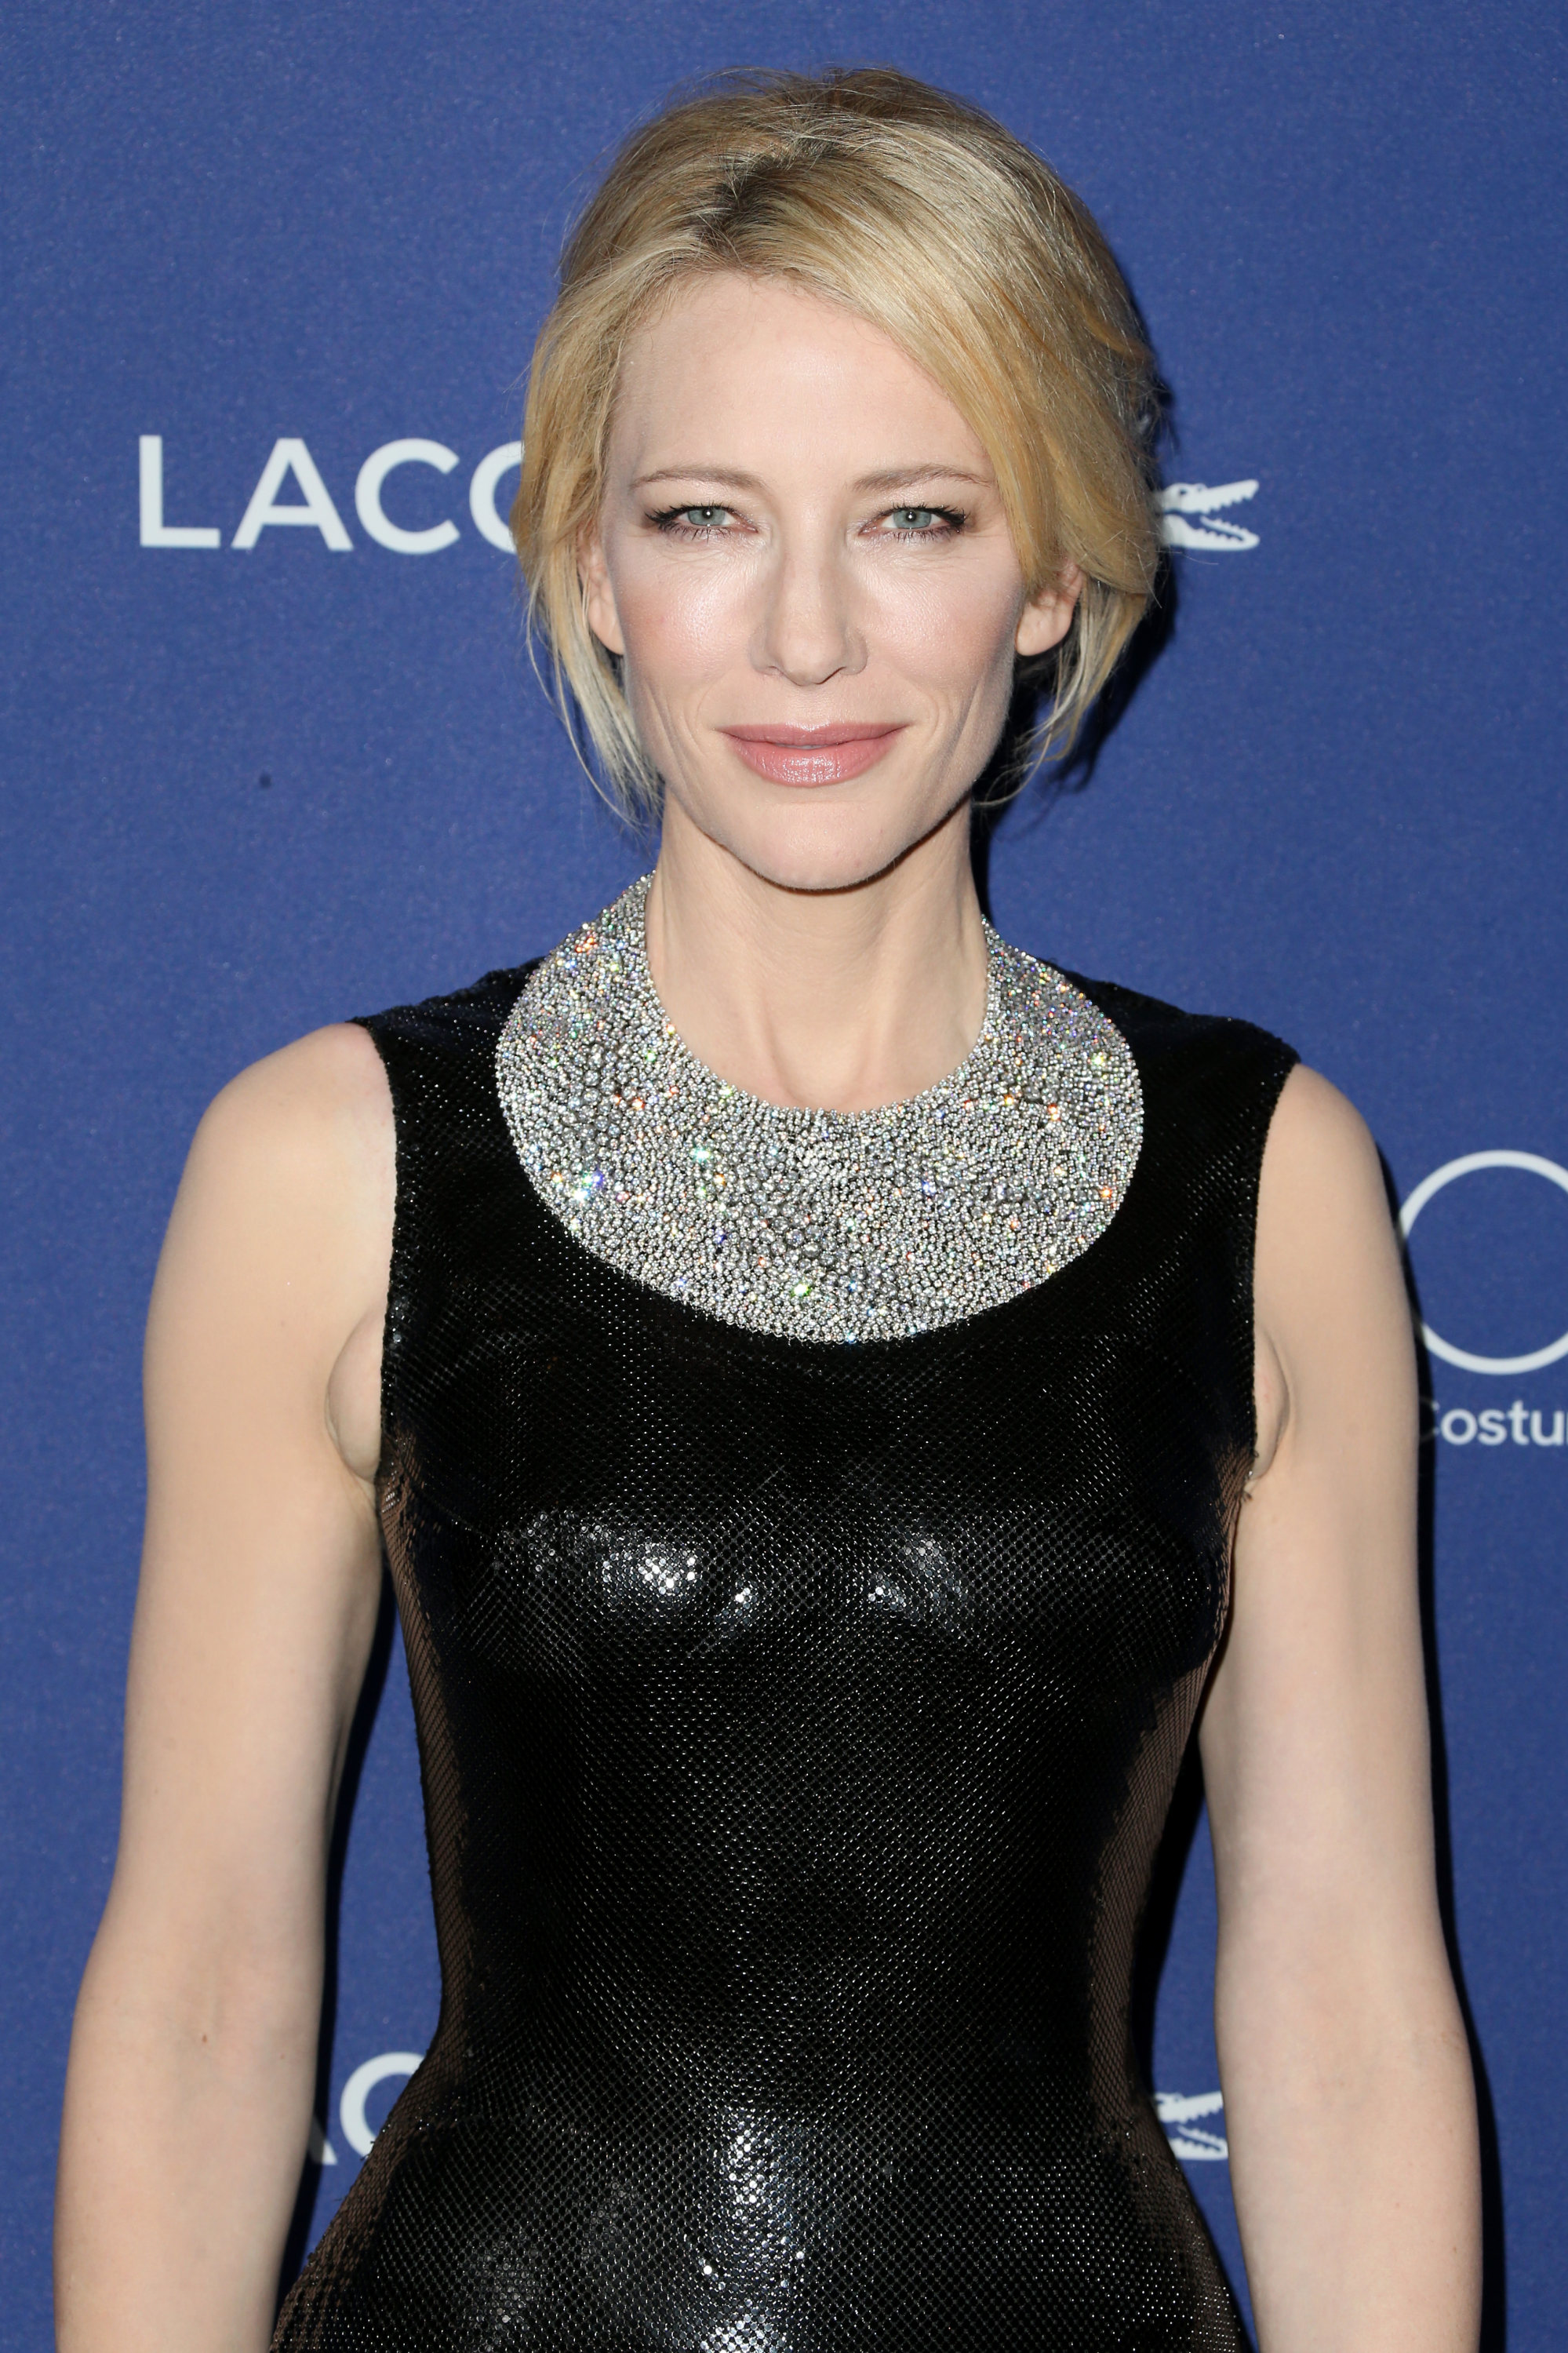 10 times Cate Blanchett wore statement jewels on the red carpet: the Tár  actress wore Louis Vuitton jewellery at the Critics' Choice Awards, and  donned Tiffany & Co. and Chopard at the